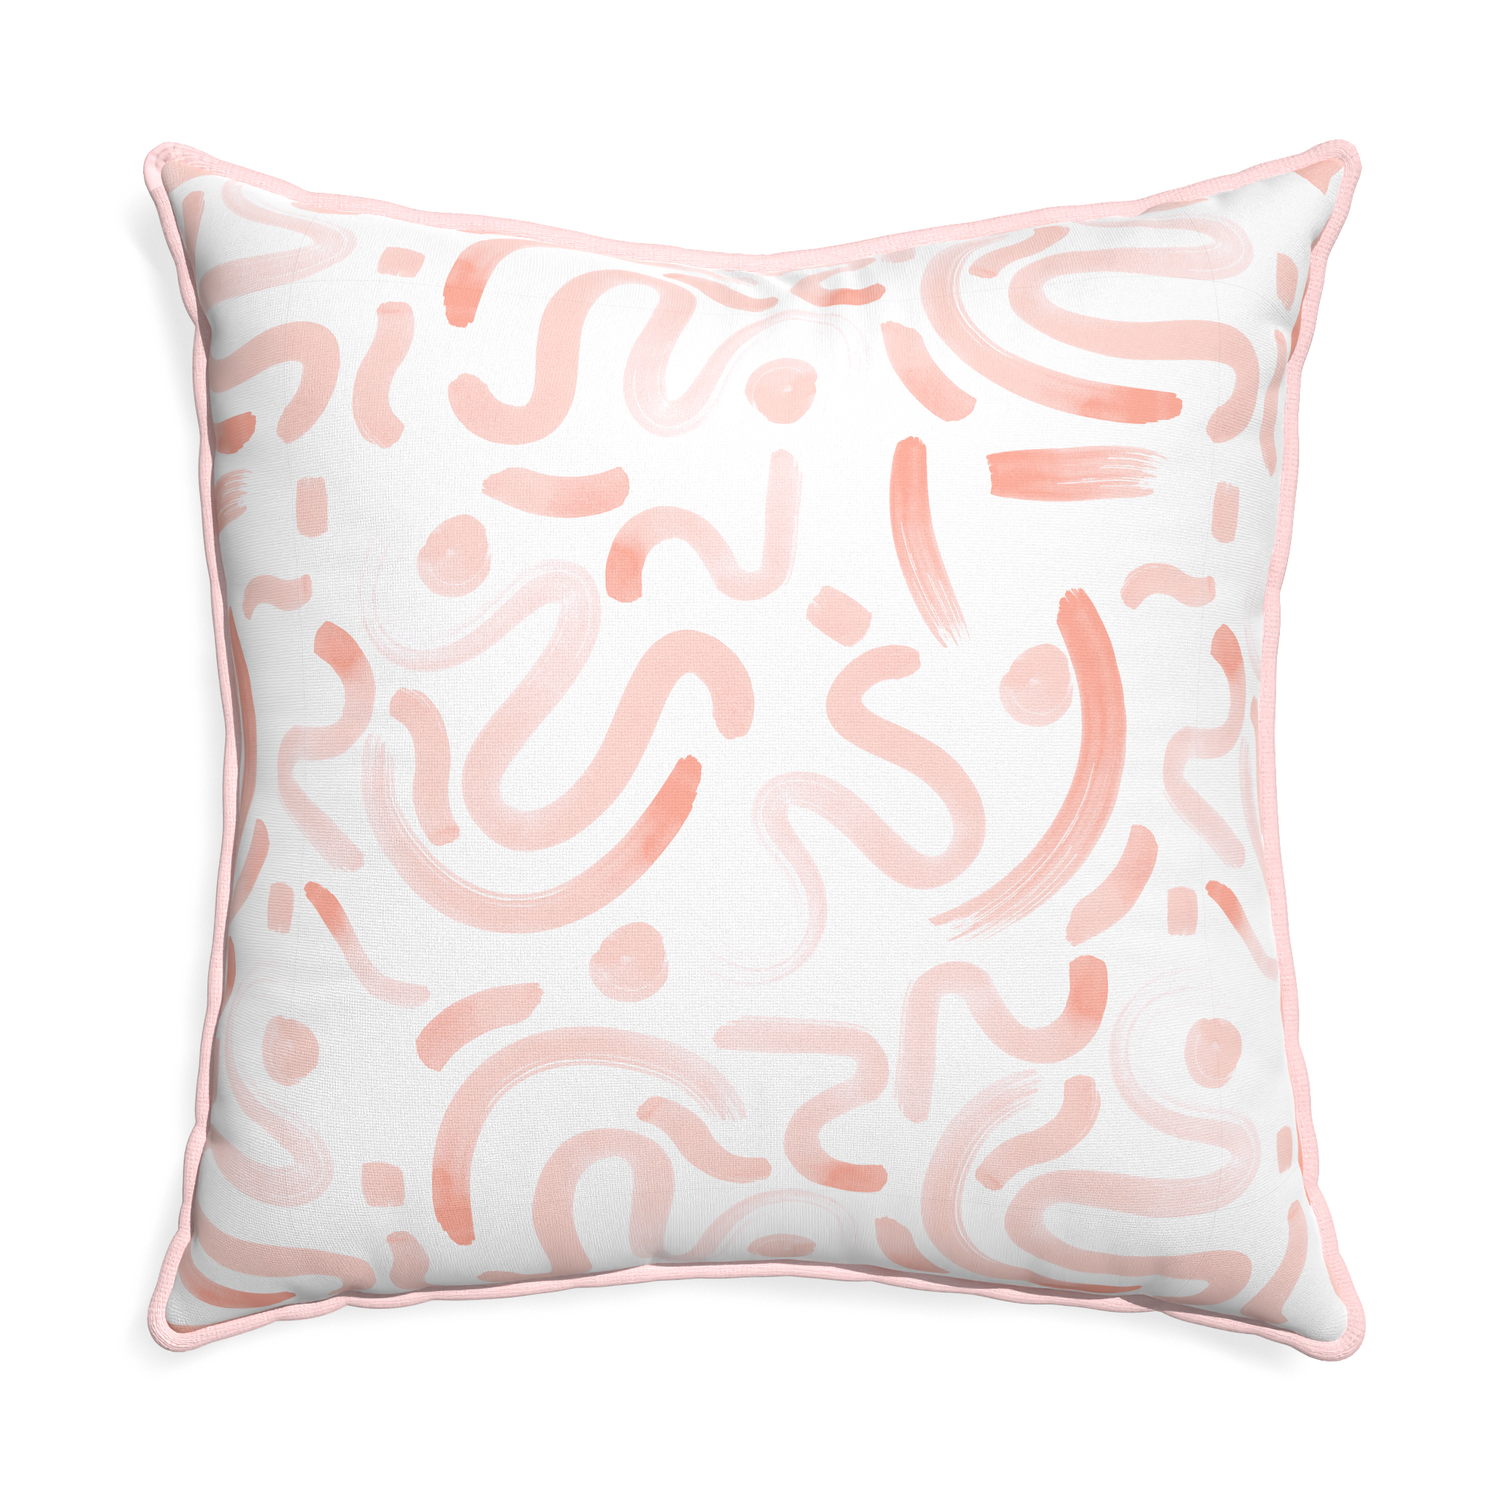 Euro-sham hockney pink custom pink graphicpillow with petal piping on white background